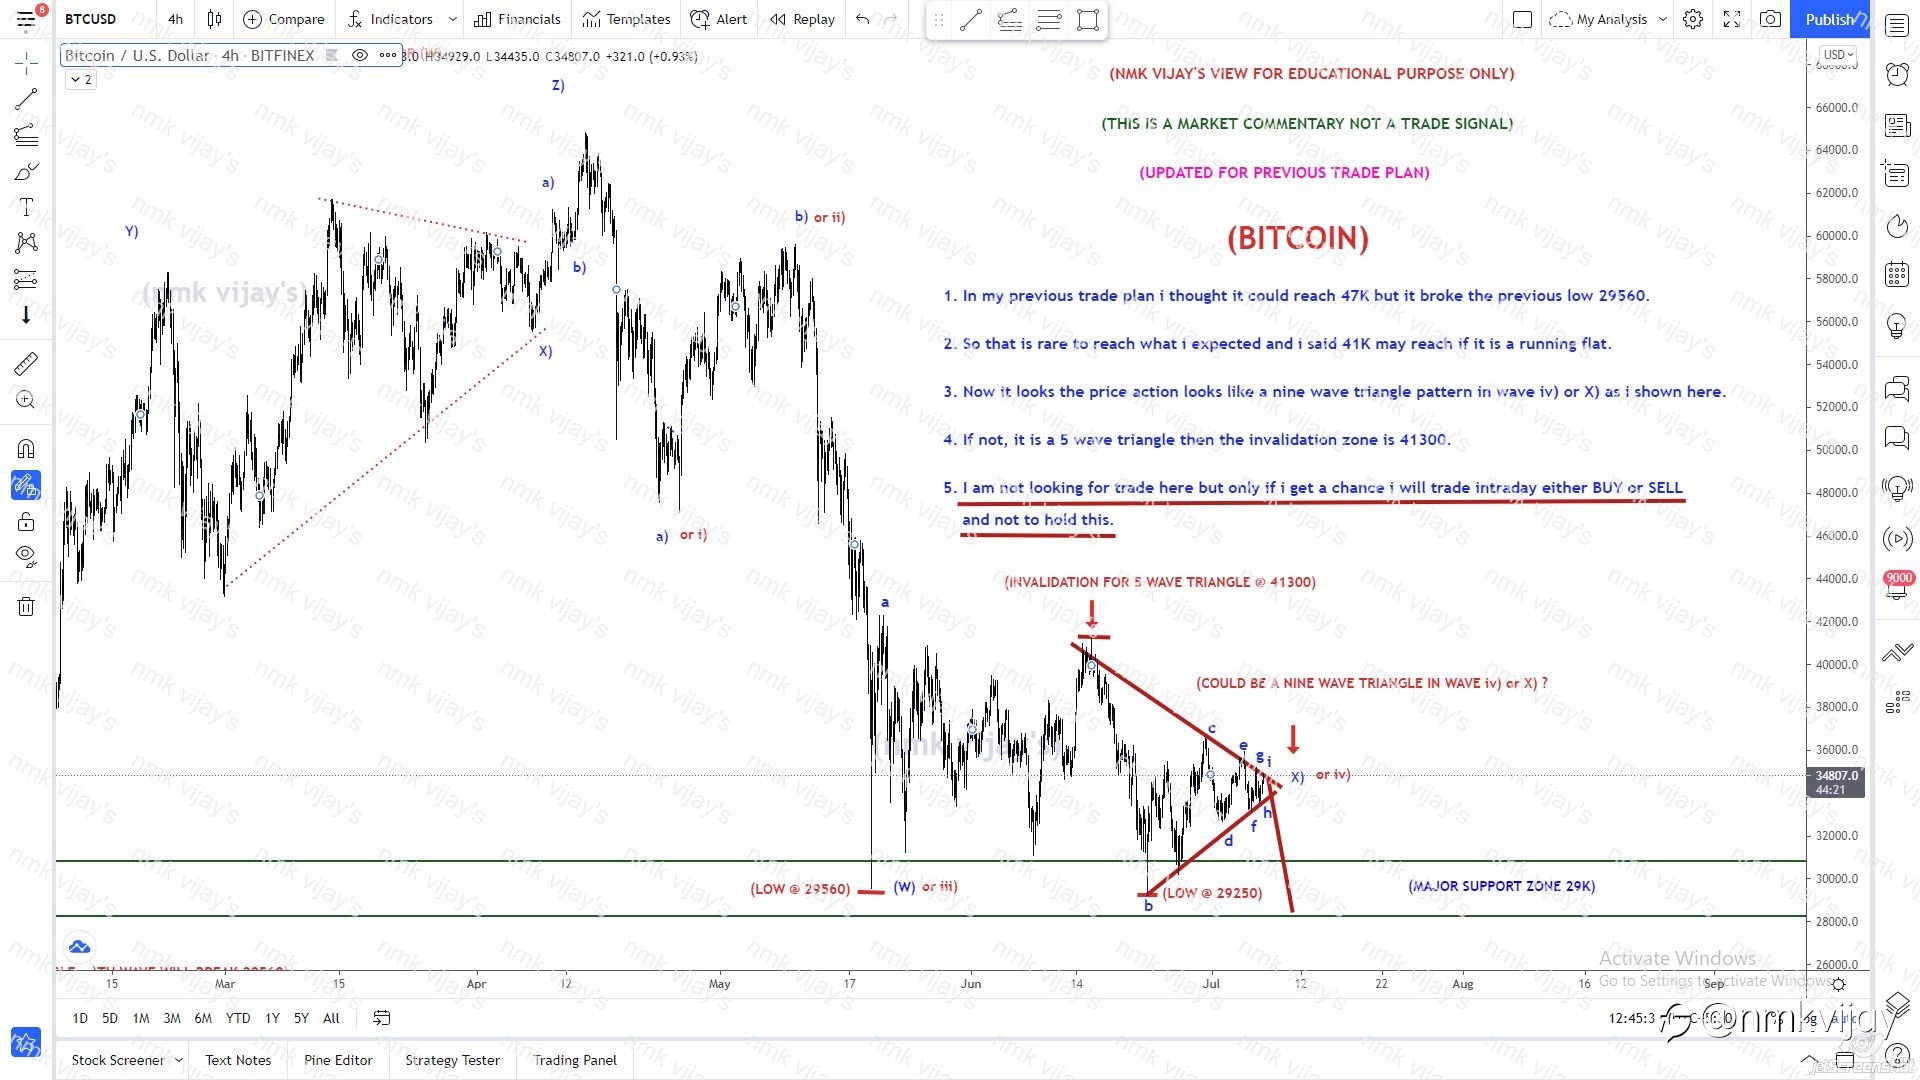 BITCOIN-May be a 9 wave triangle in X) or iv)?